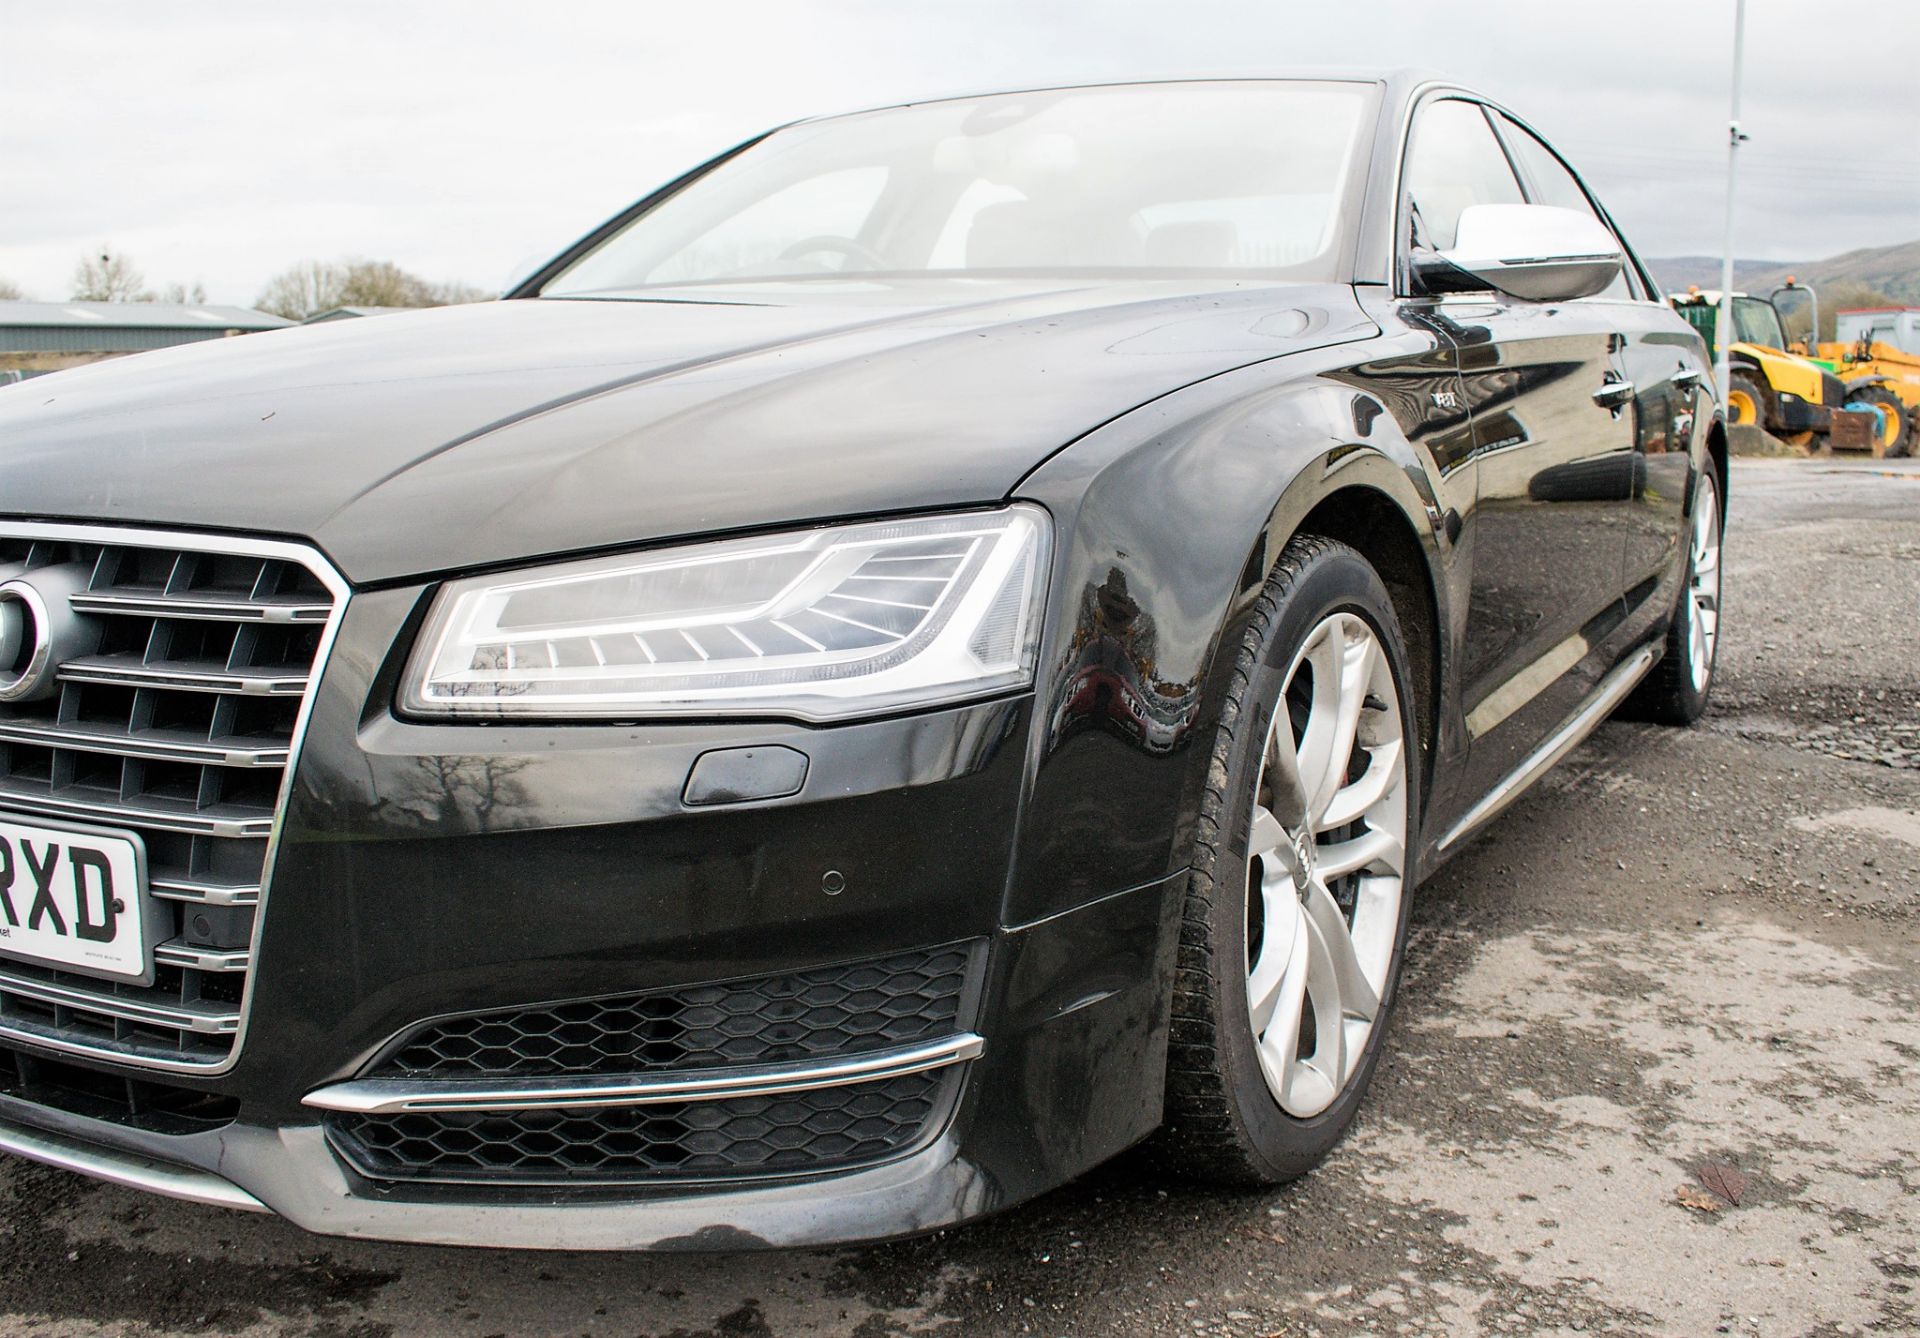 Audi S8 V8 TFSi Quattro Auto 4 door saloon car Registration Number: MW65 RXD Date of Registration: - Image 10 of 20